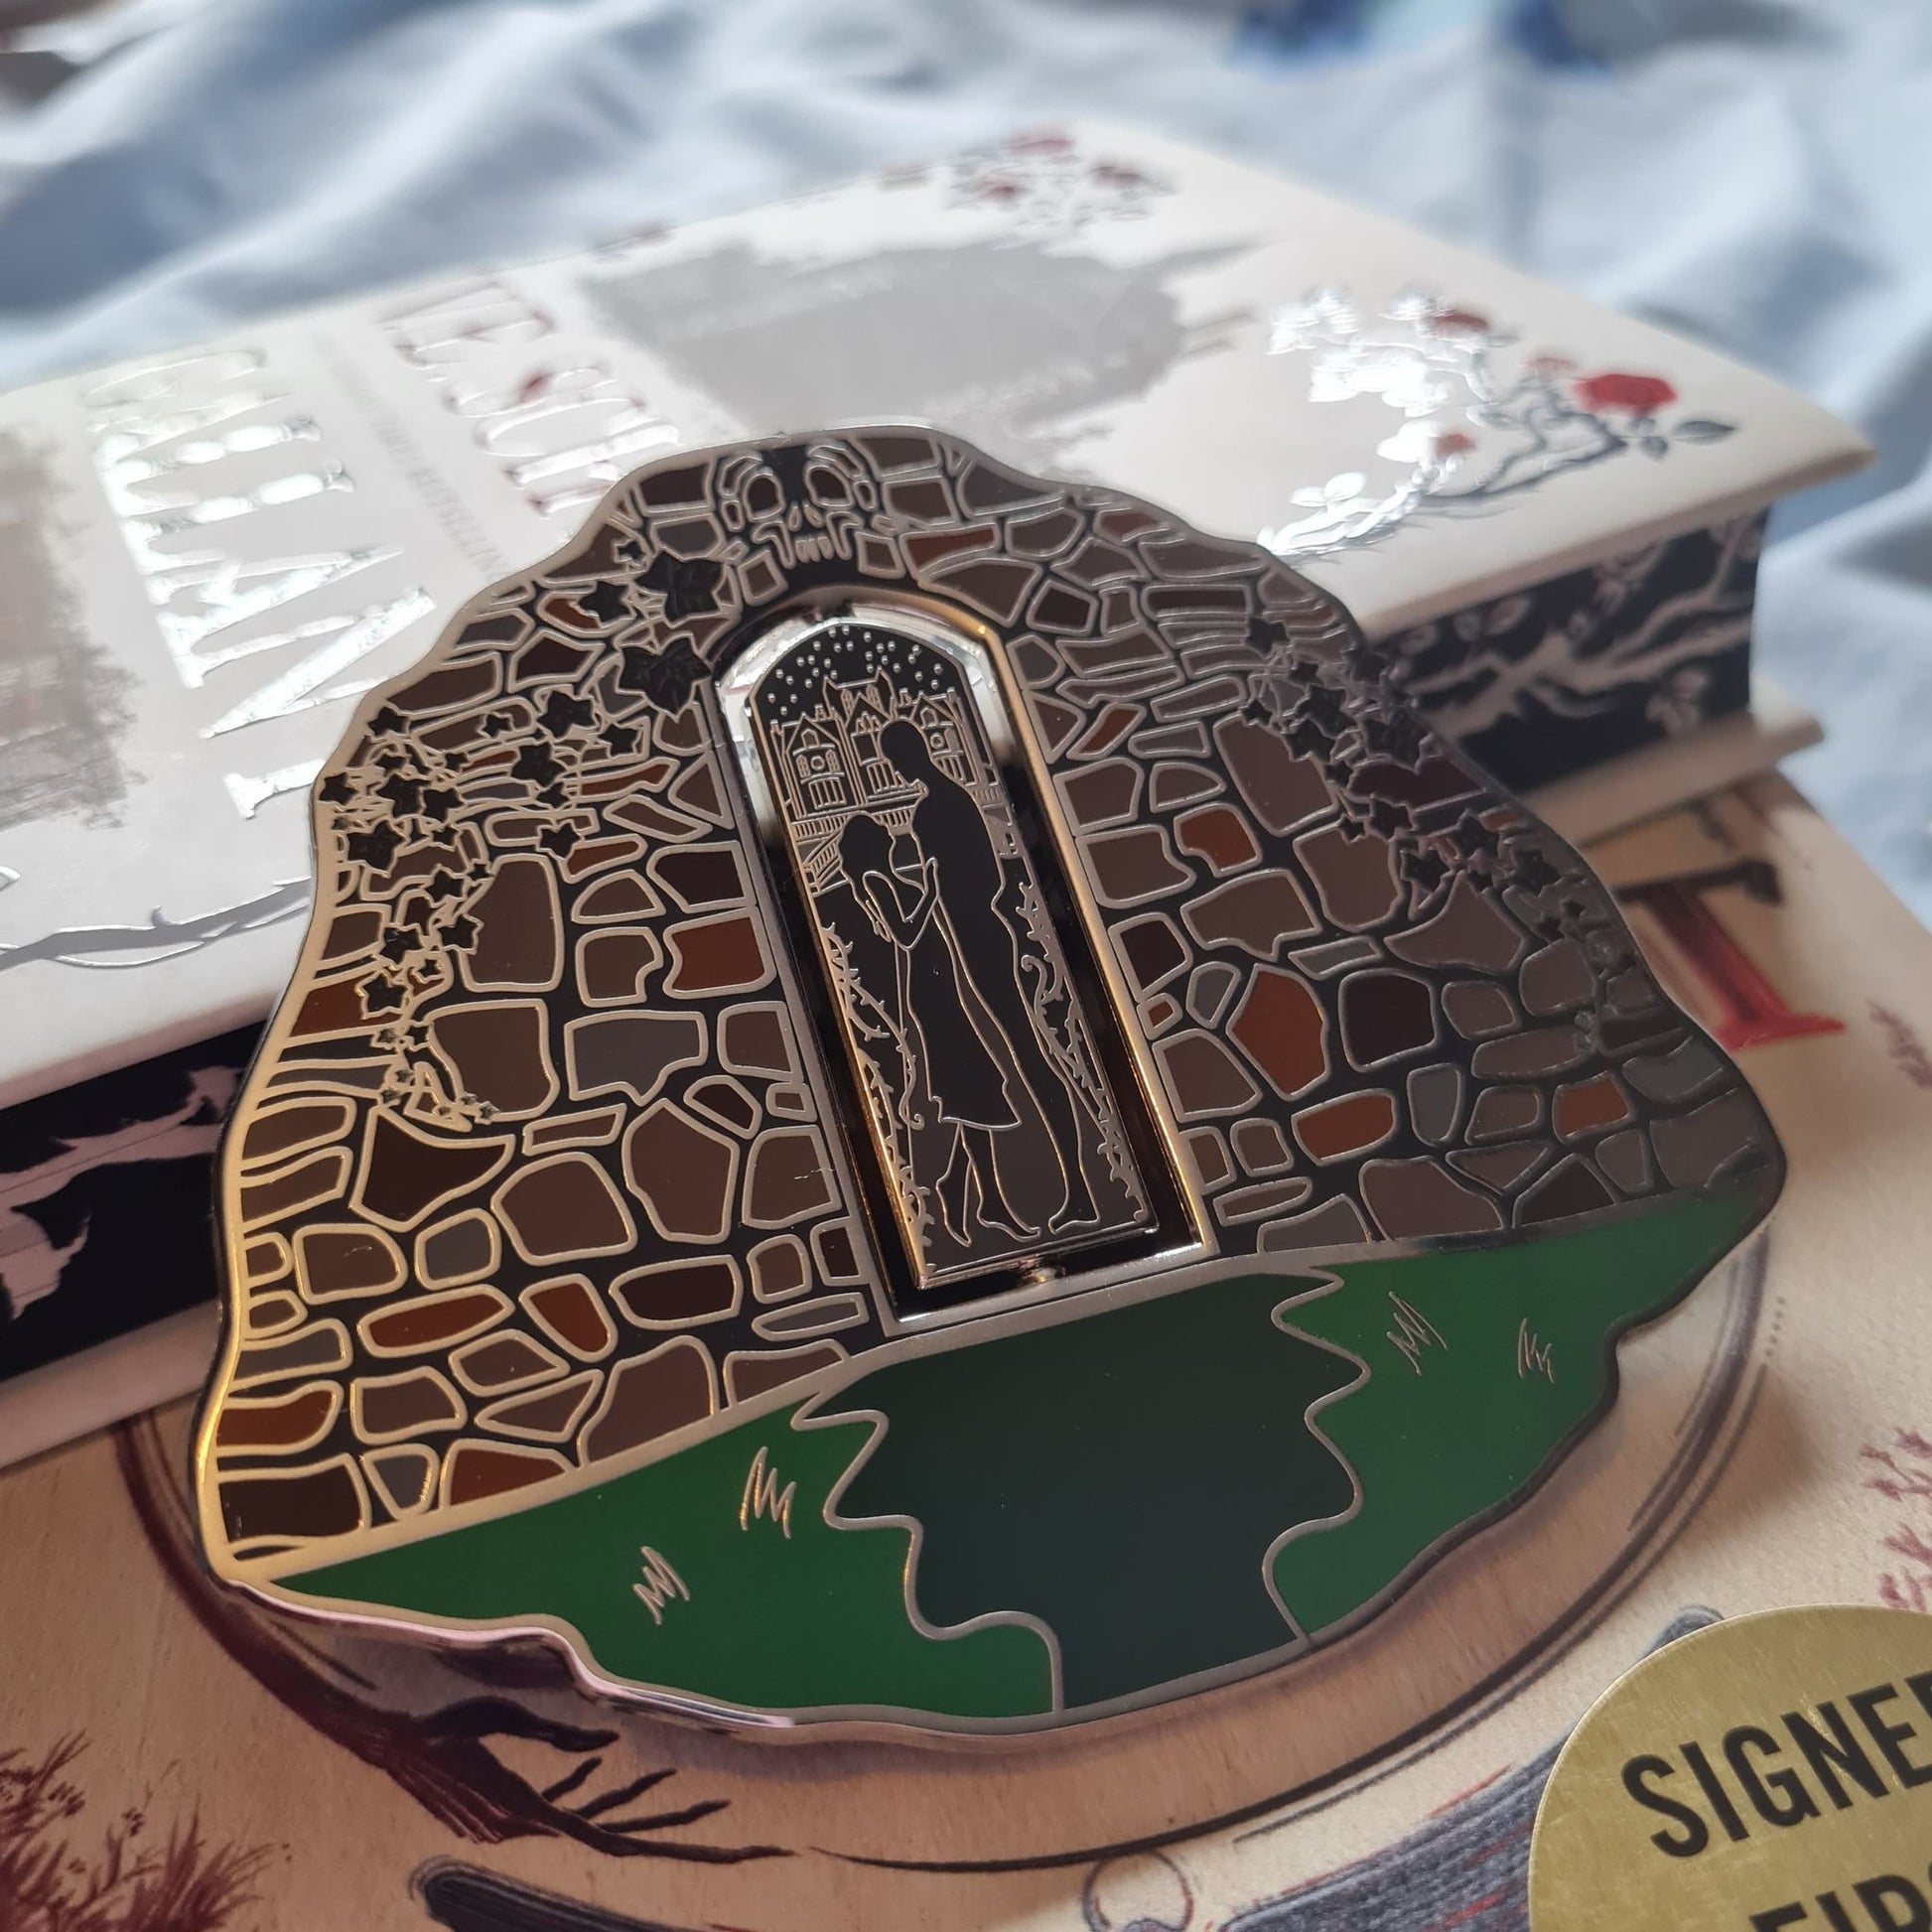 The Foolish Little Mouse deluxe enamel pin inspired by Gallant by V.E Schwab